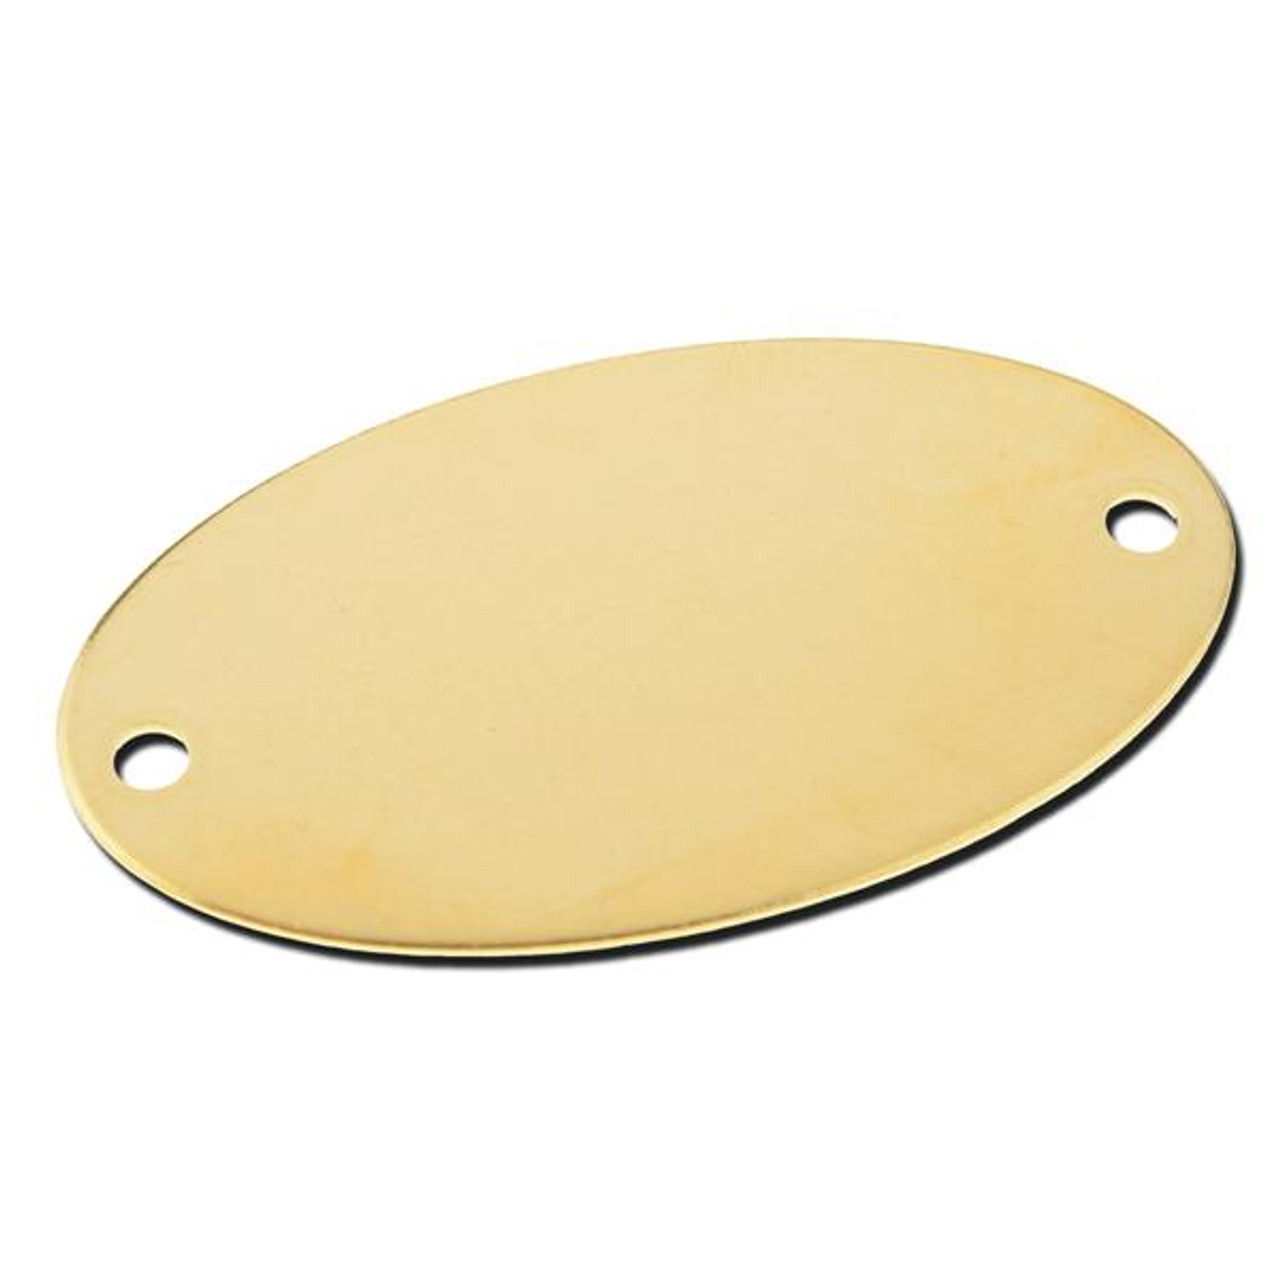 Oval Brass Tag 1-5/32 Inch x 2-1/16 Inch - .040 Thickness 2 Holes US Made